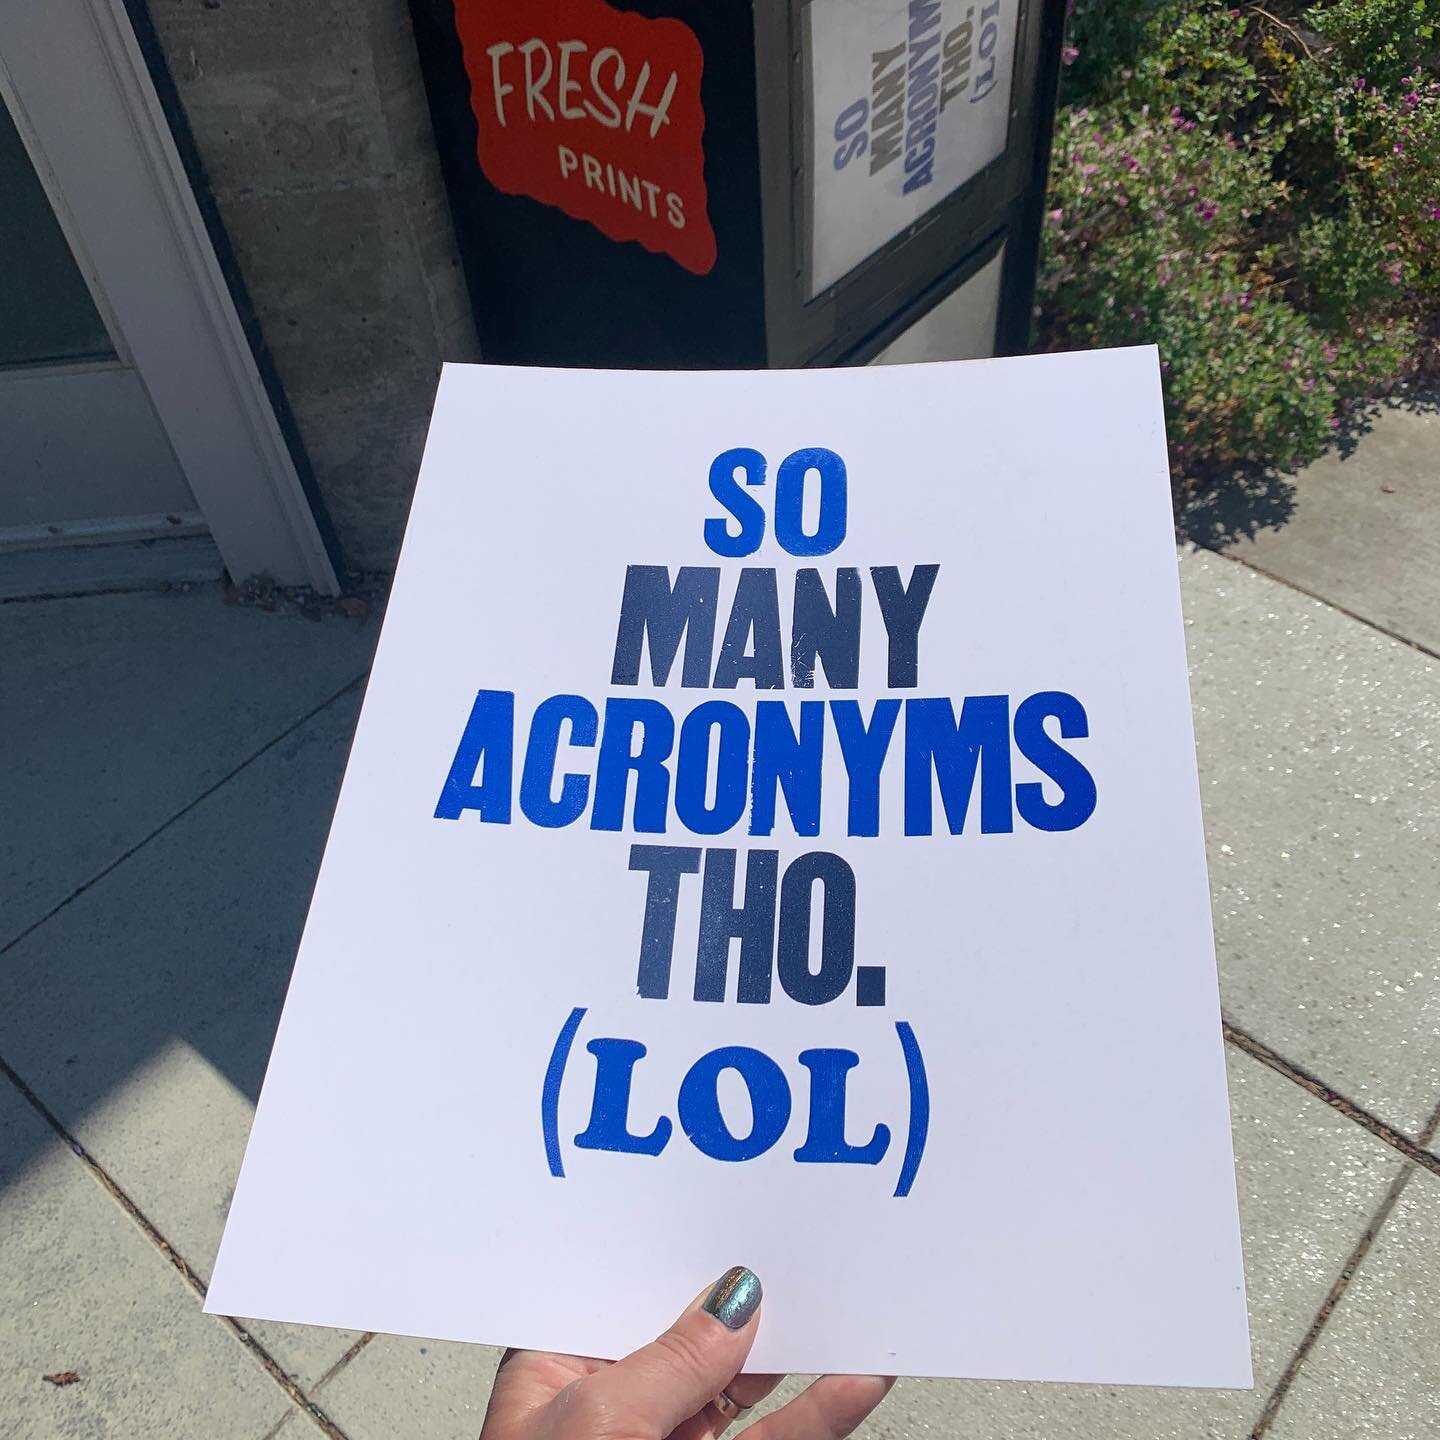 In the Fresh Prints Box:
&ldquo;So Many Acronyms&rdquo; 
Letterpress printed by @mr_positivity 
Thanks Patrick! Love the use of our newly acquire Cooper Black! 
. 
Want one?? Please come by to pick one up from the Fresh Prints box while they last. Th